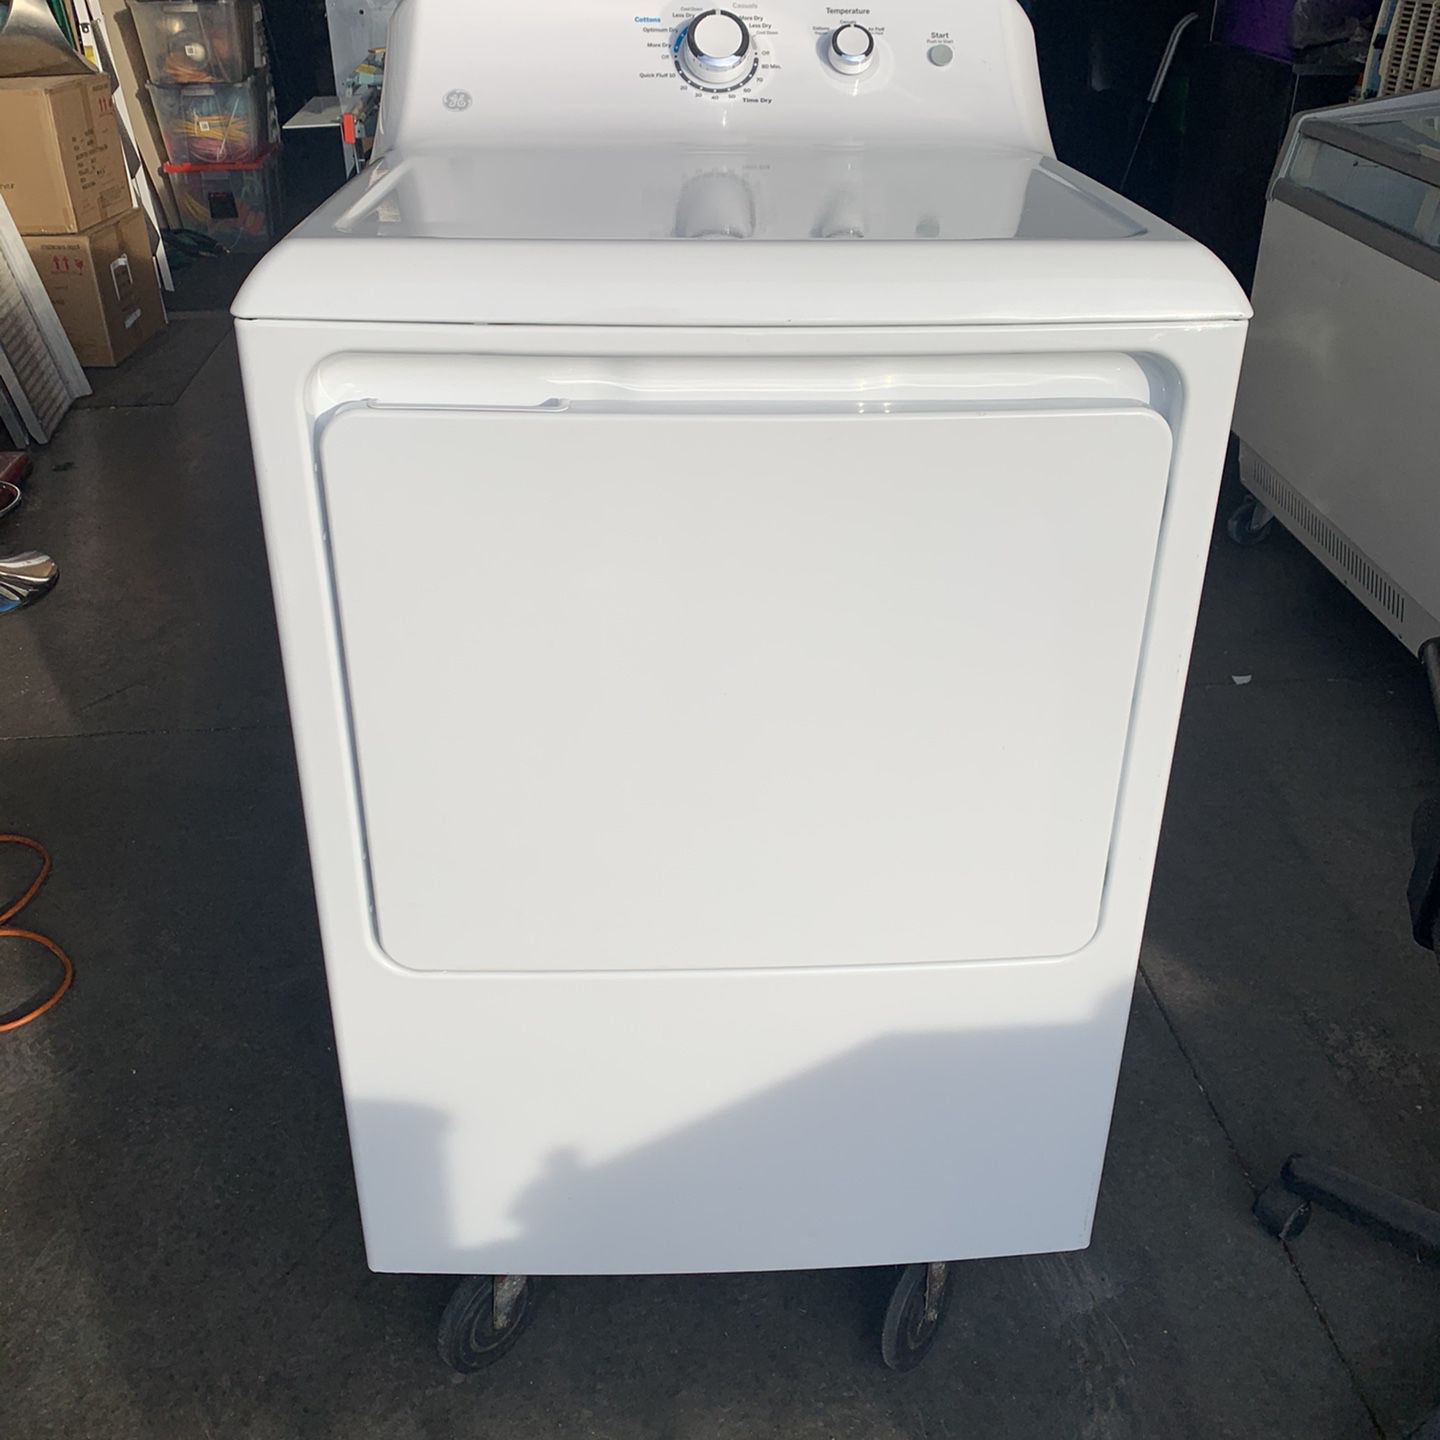 GENERAL ELECTRIC DRYER